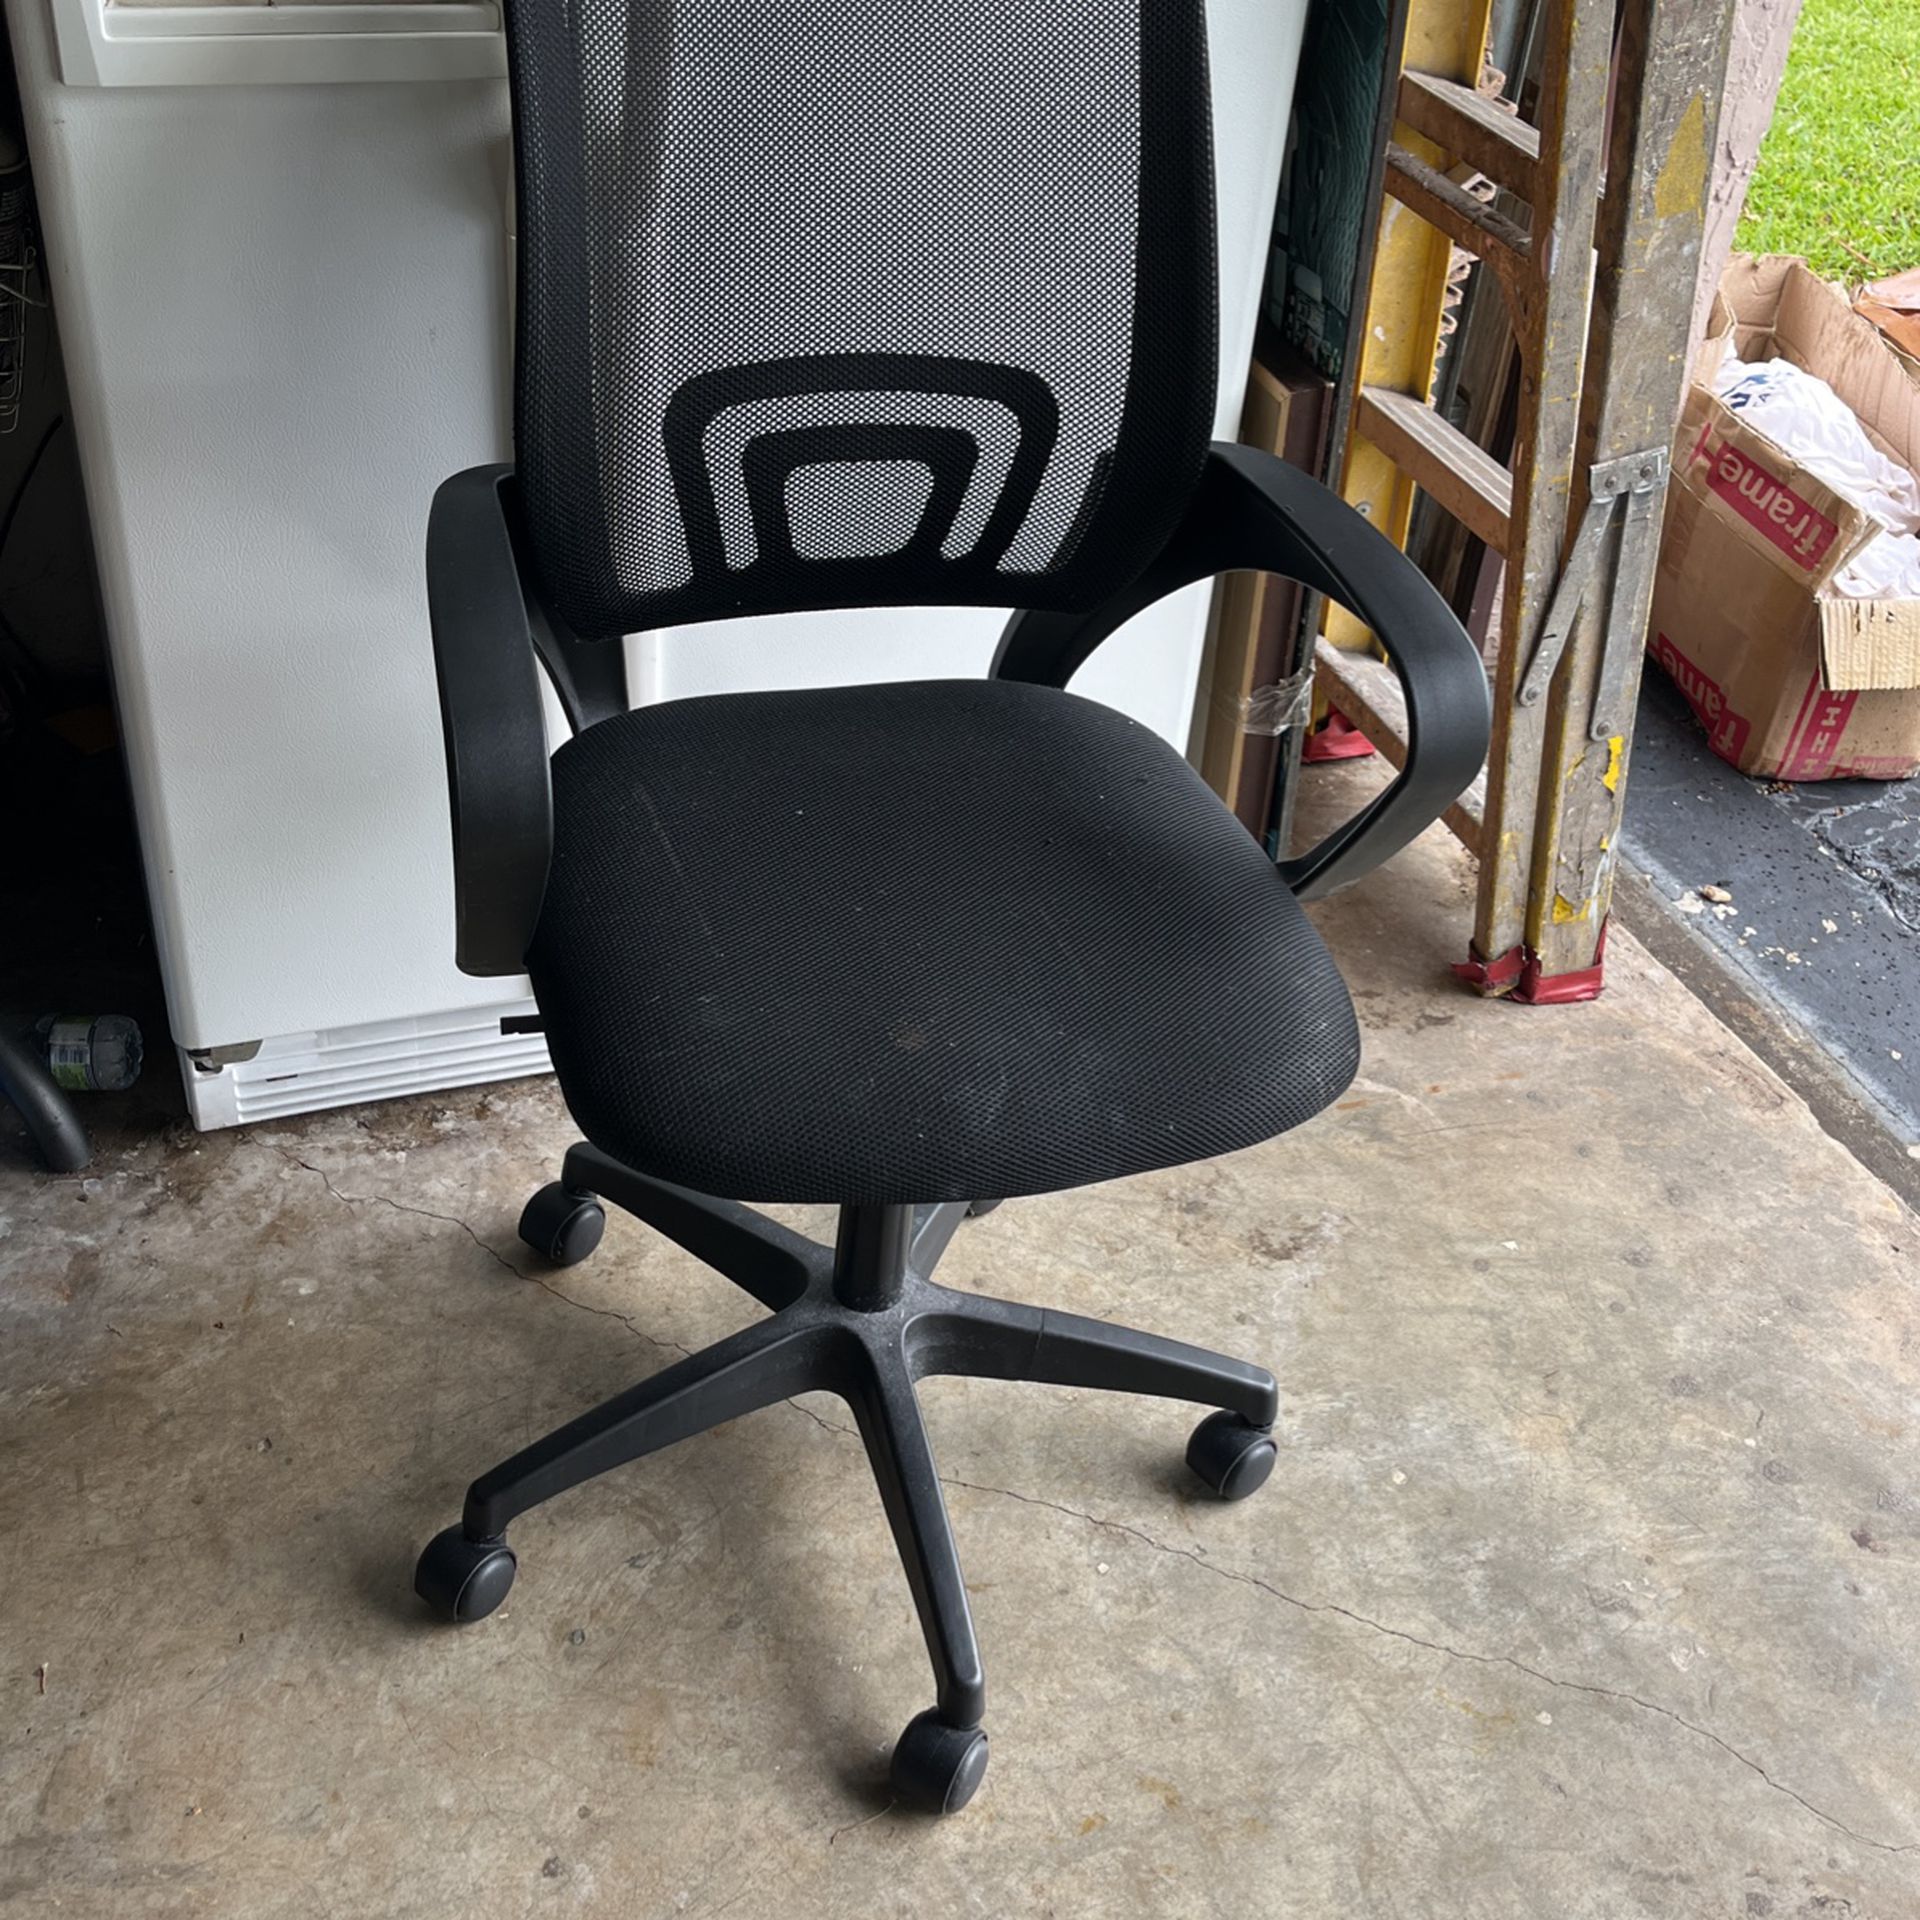 Office Chair $15